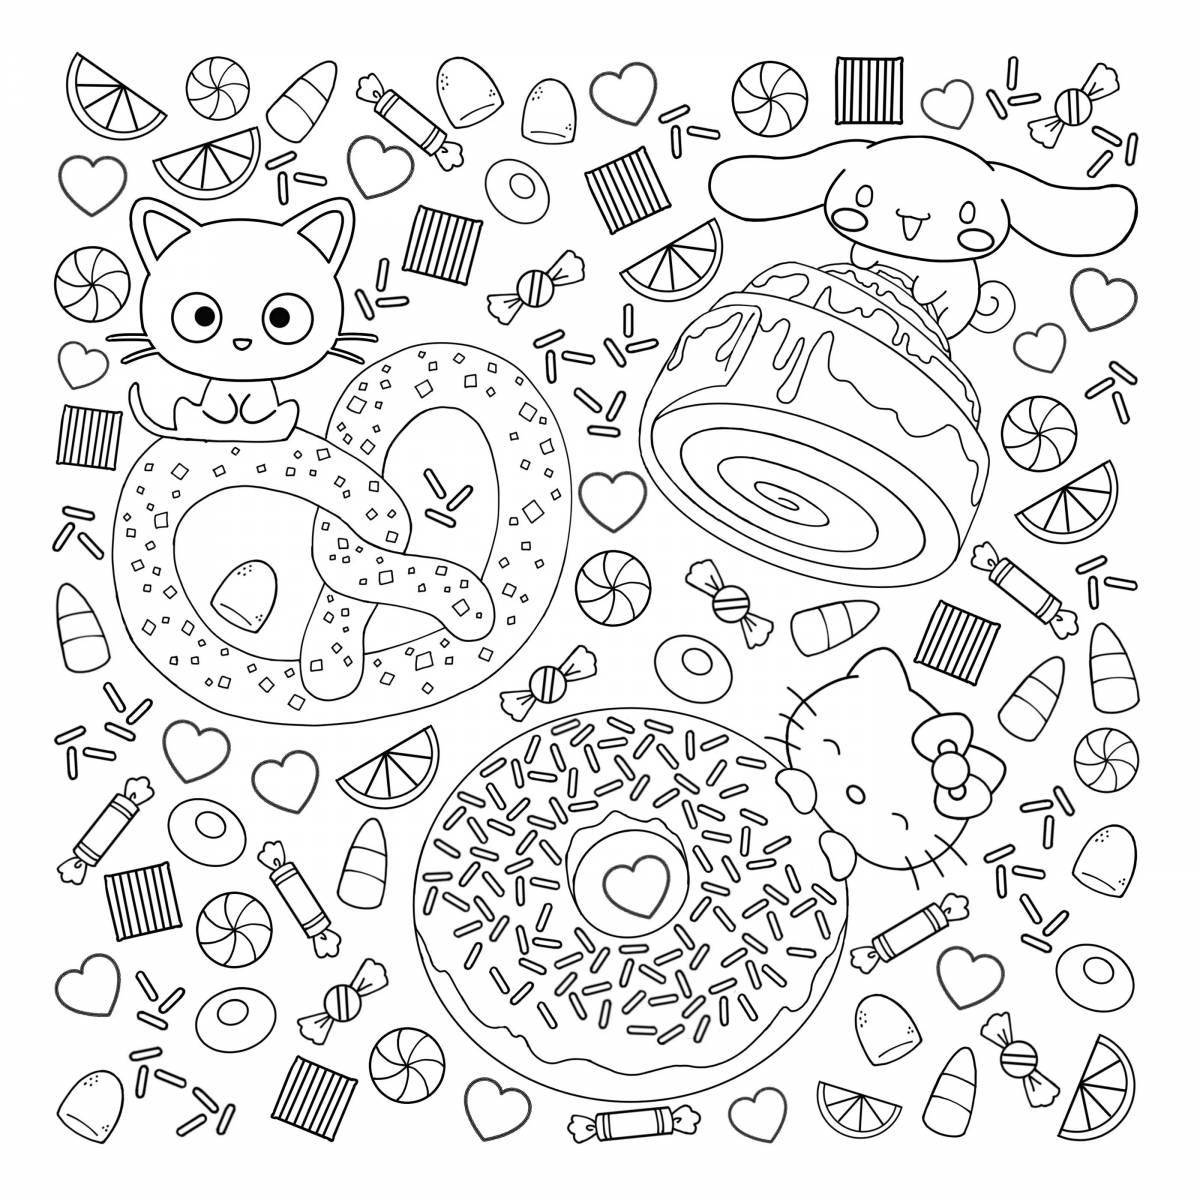 Happy lost kittens coloring page